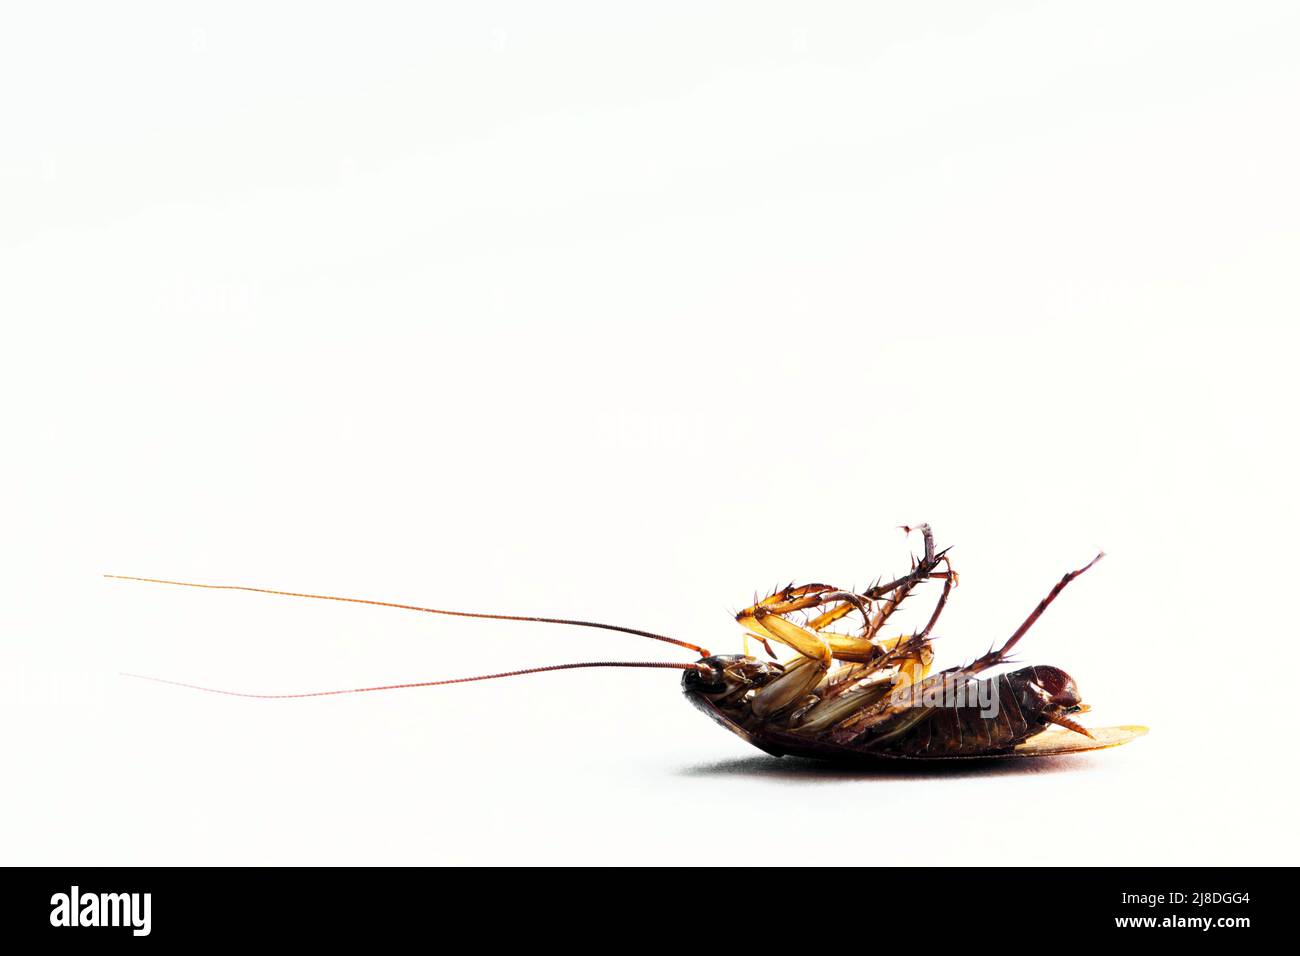 American Cockroach lying dead on its back isolated on a plain white background with copy space, macro ventral view. Stock Photo